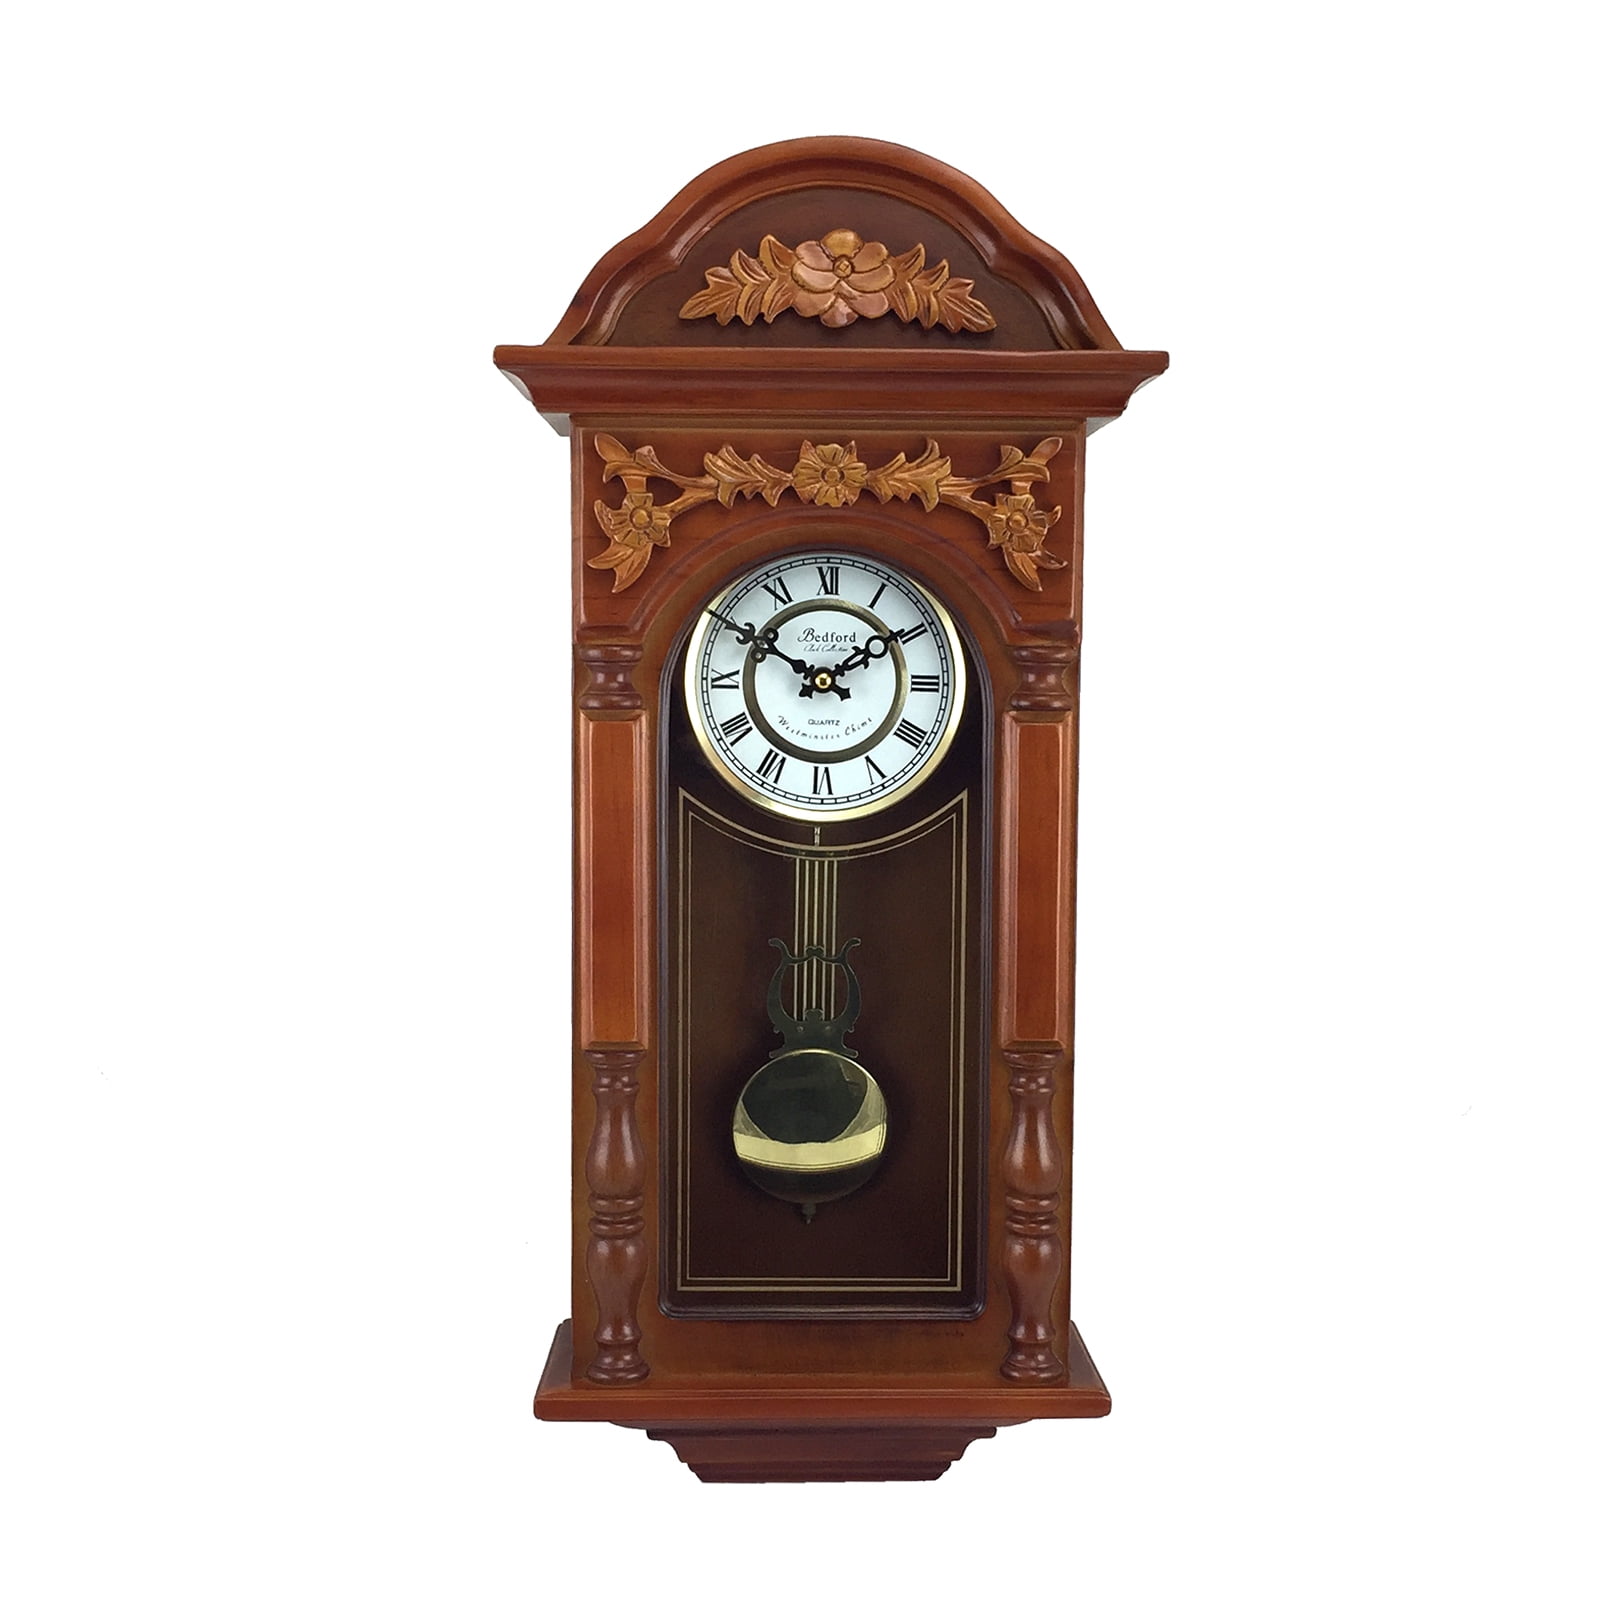 Oak Bedford Clock Collection Classic Chiming Wall Clock with Swinging Pendulum 